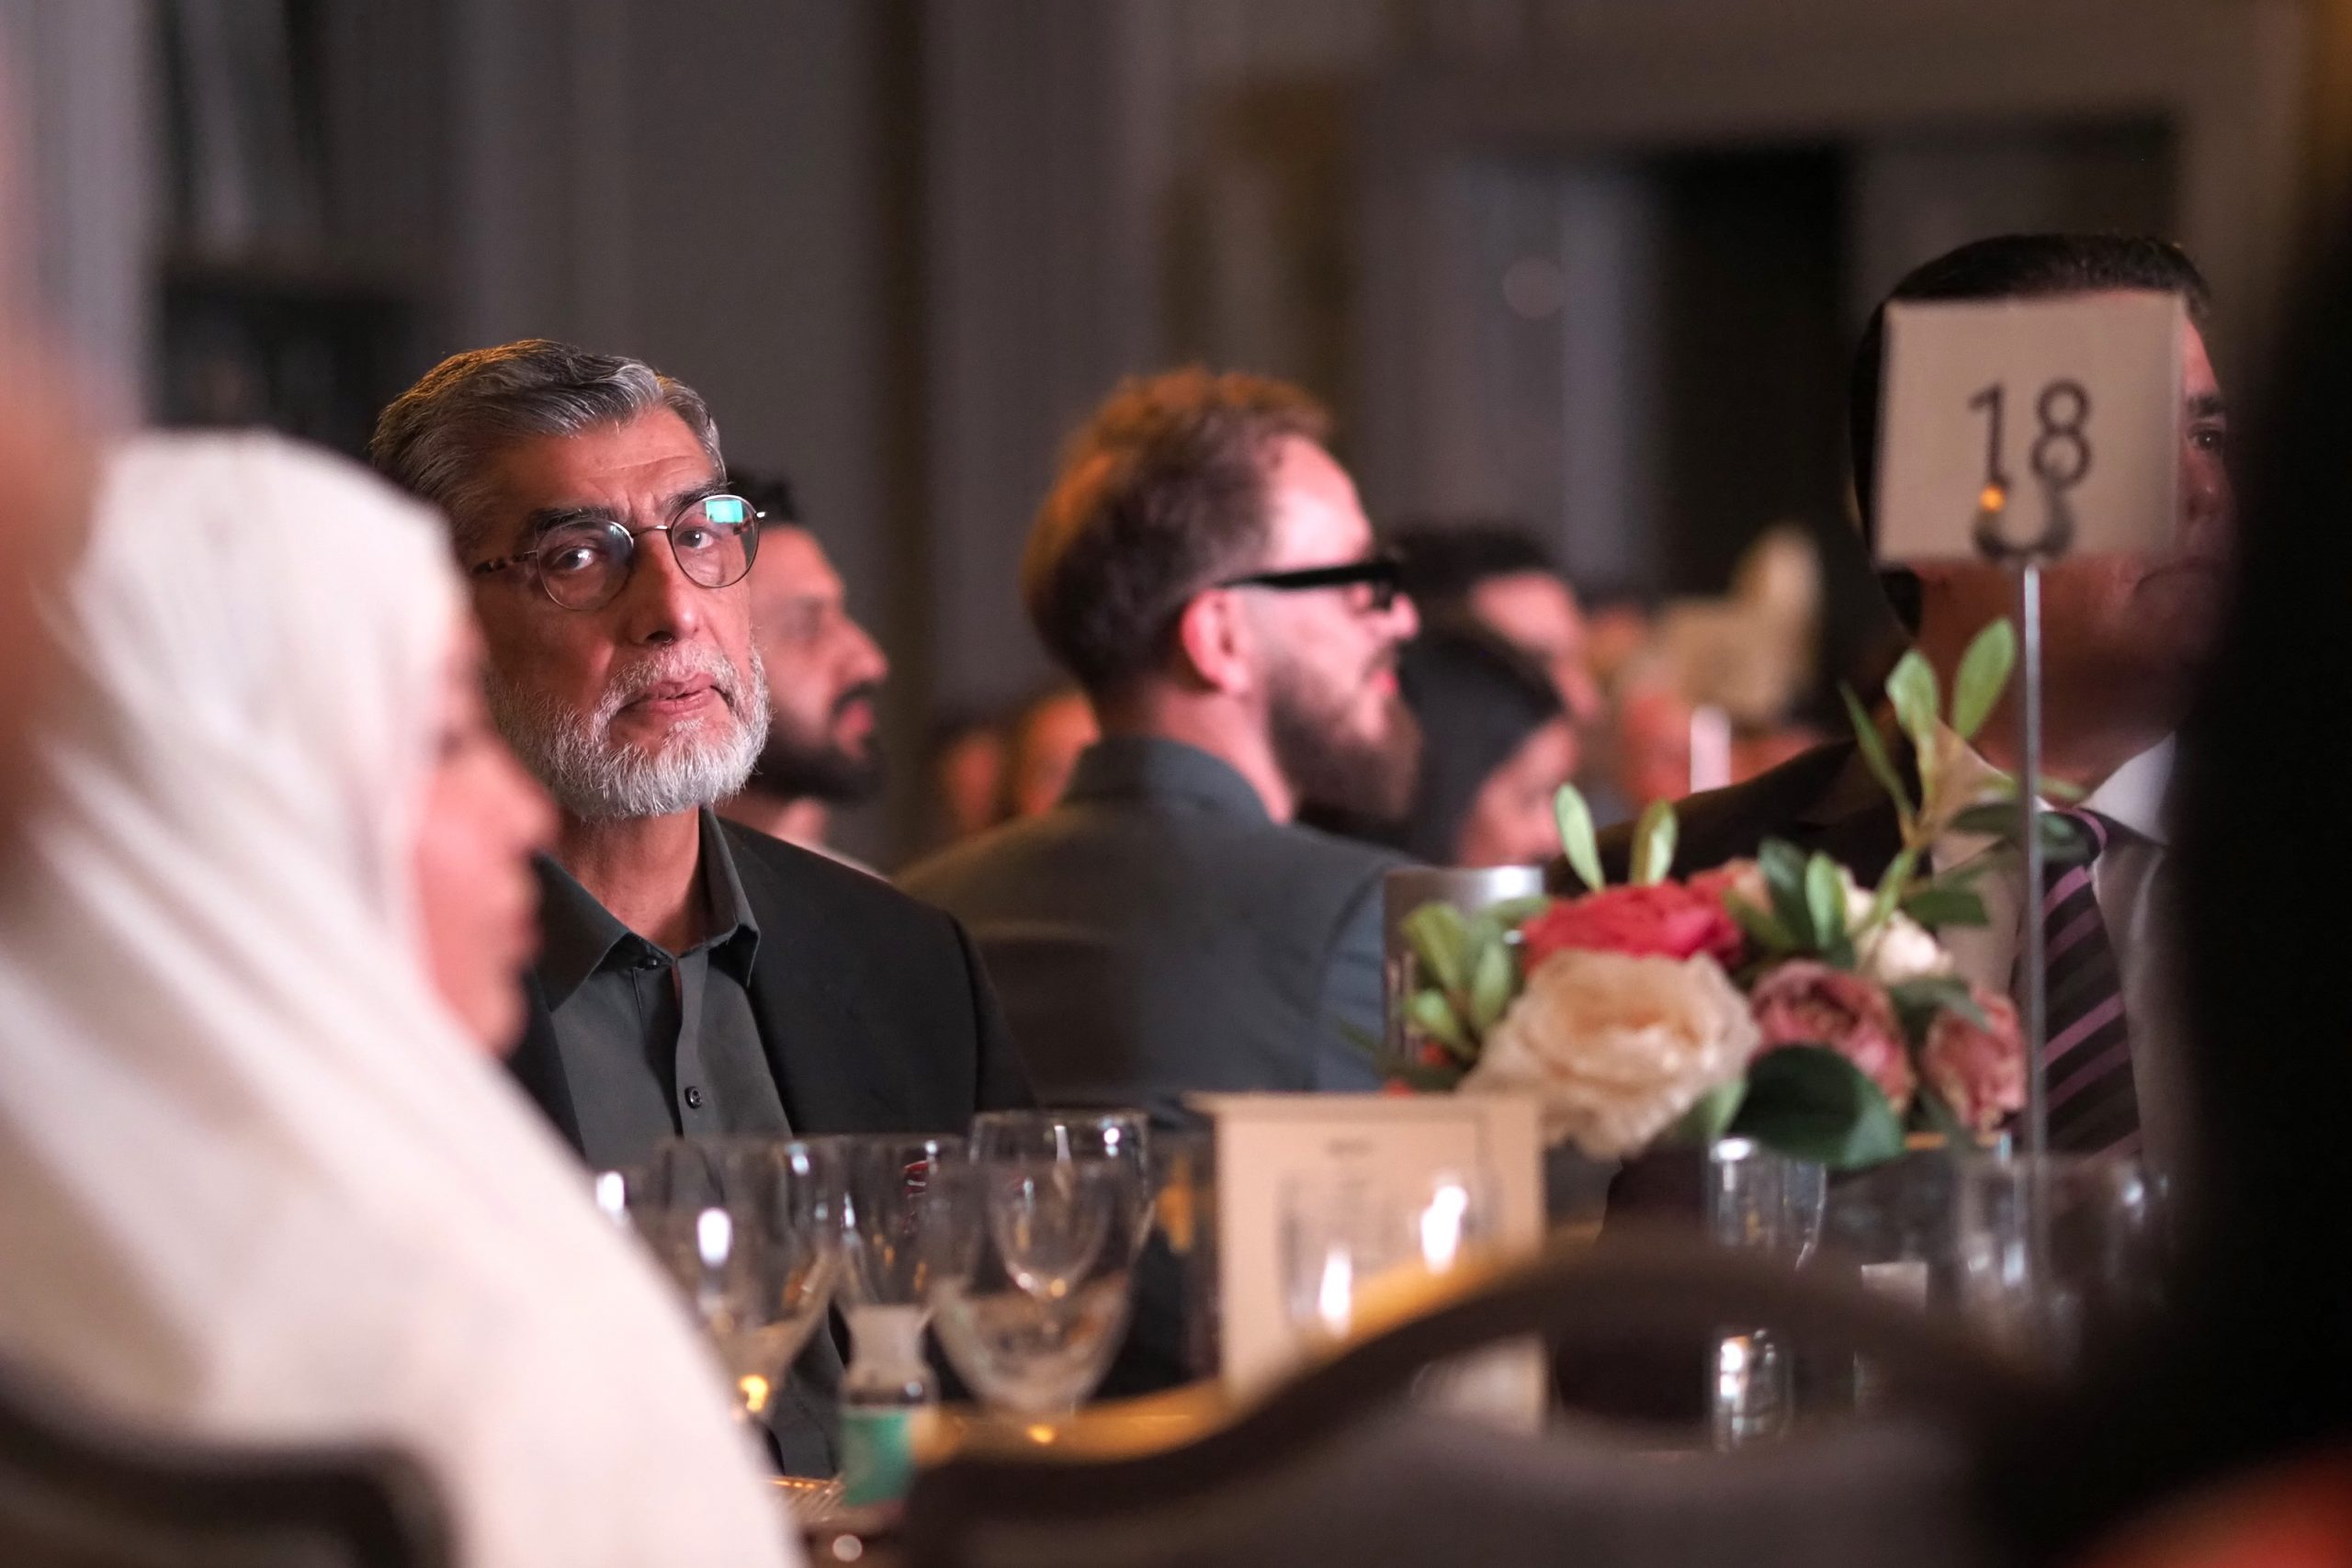 Community Iftar Addresses Untold Stories of Mental Health - About Islam